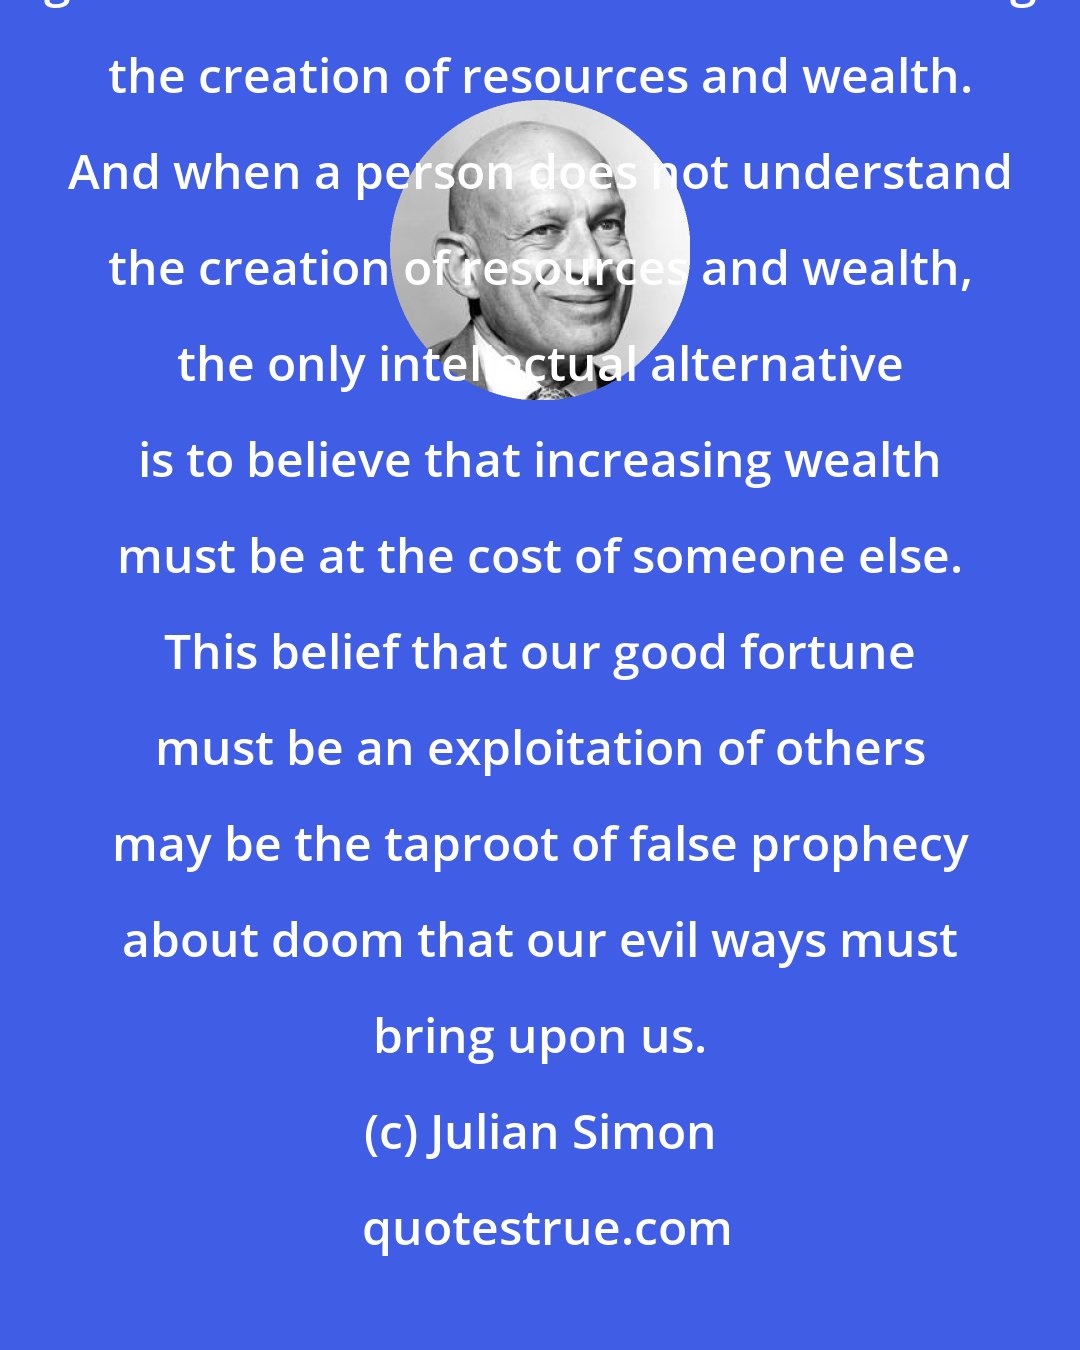 Julian Simon: Not understanding the process of a spontaneously-ordered economy goes hand-in-hand with not understanding the creation of resources and wealth. And when a person does not understand the creation of resources and wealth, the only intellectual alternative is to believe that increasing wealth must be at the cost of someone else. This belief that our good fortune must be an exploitation of others may be the taproot of false prophecy about doom that our evil ways must bring upon us.